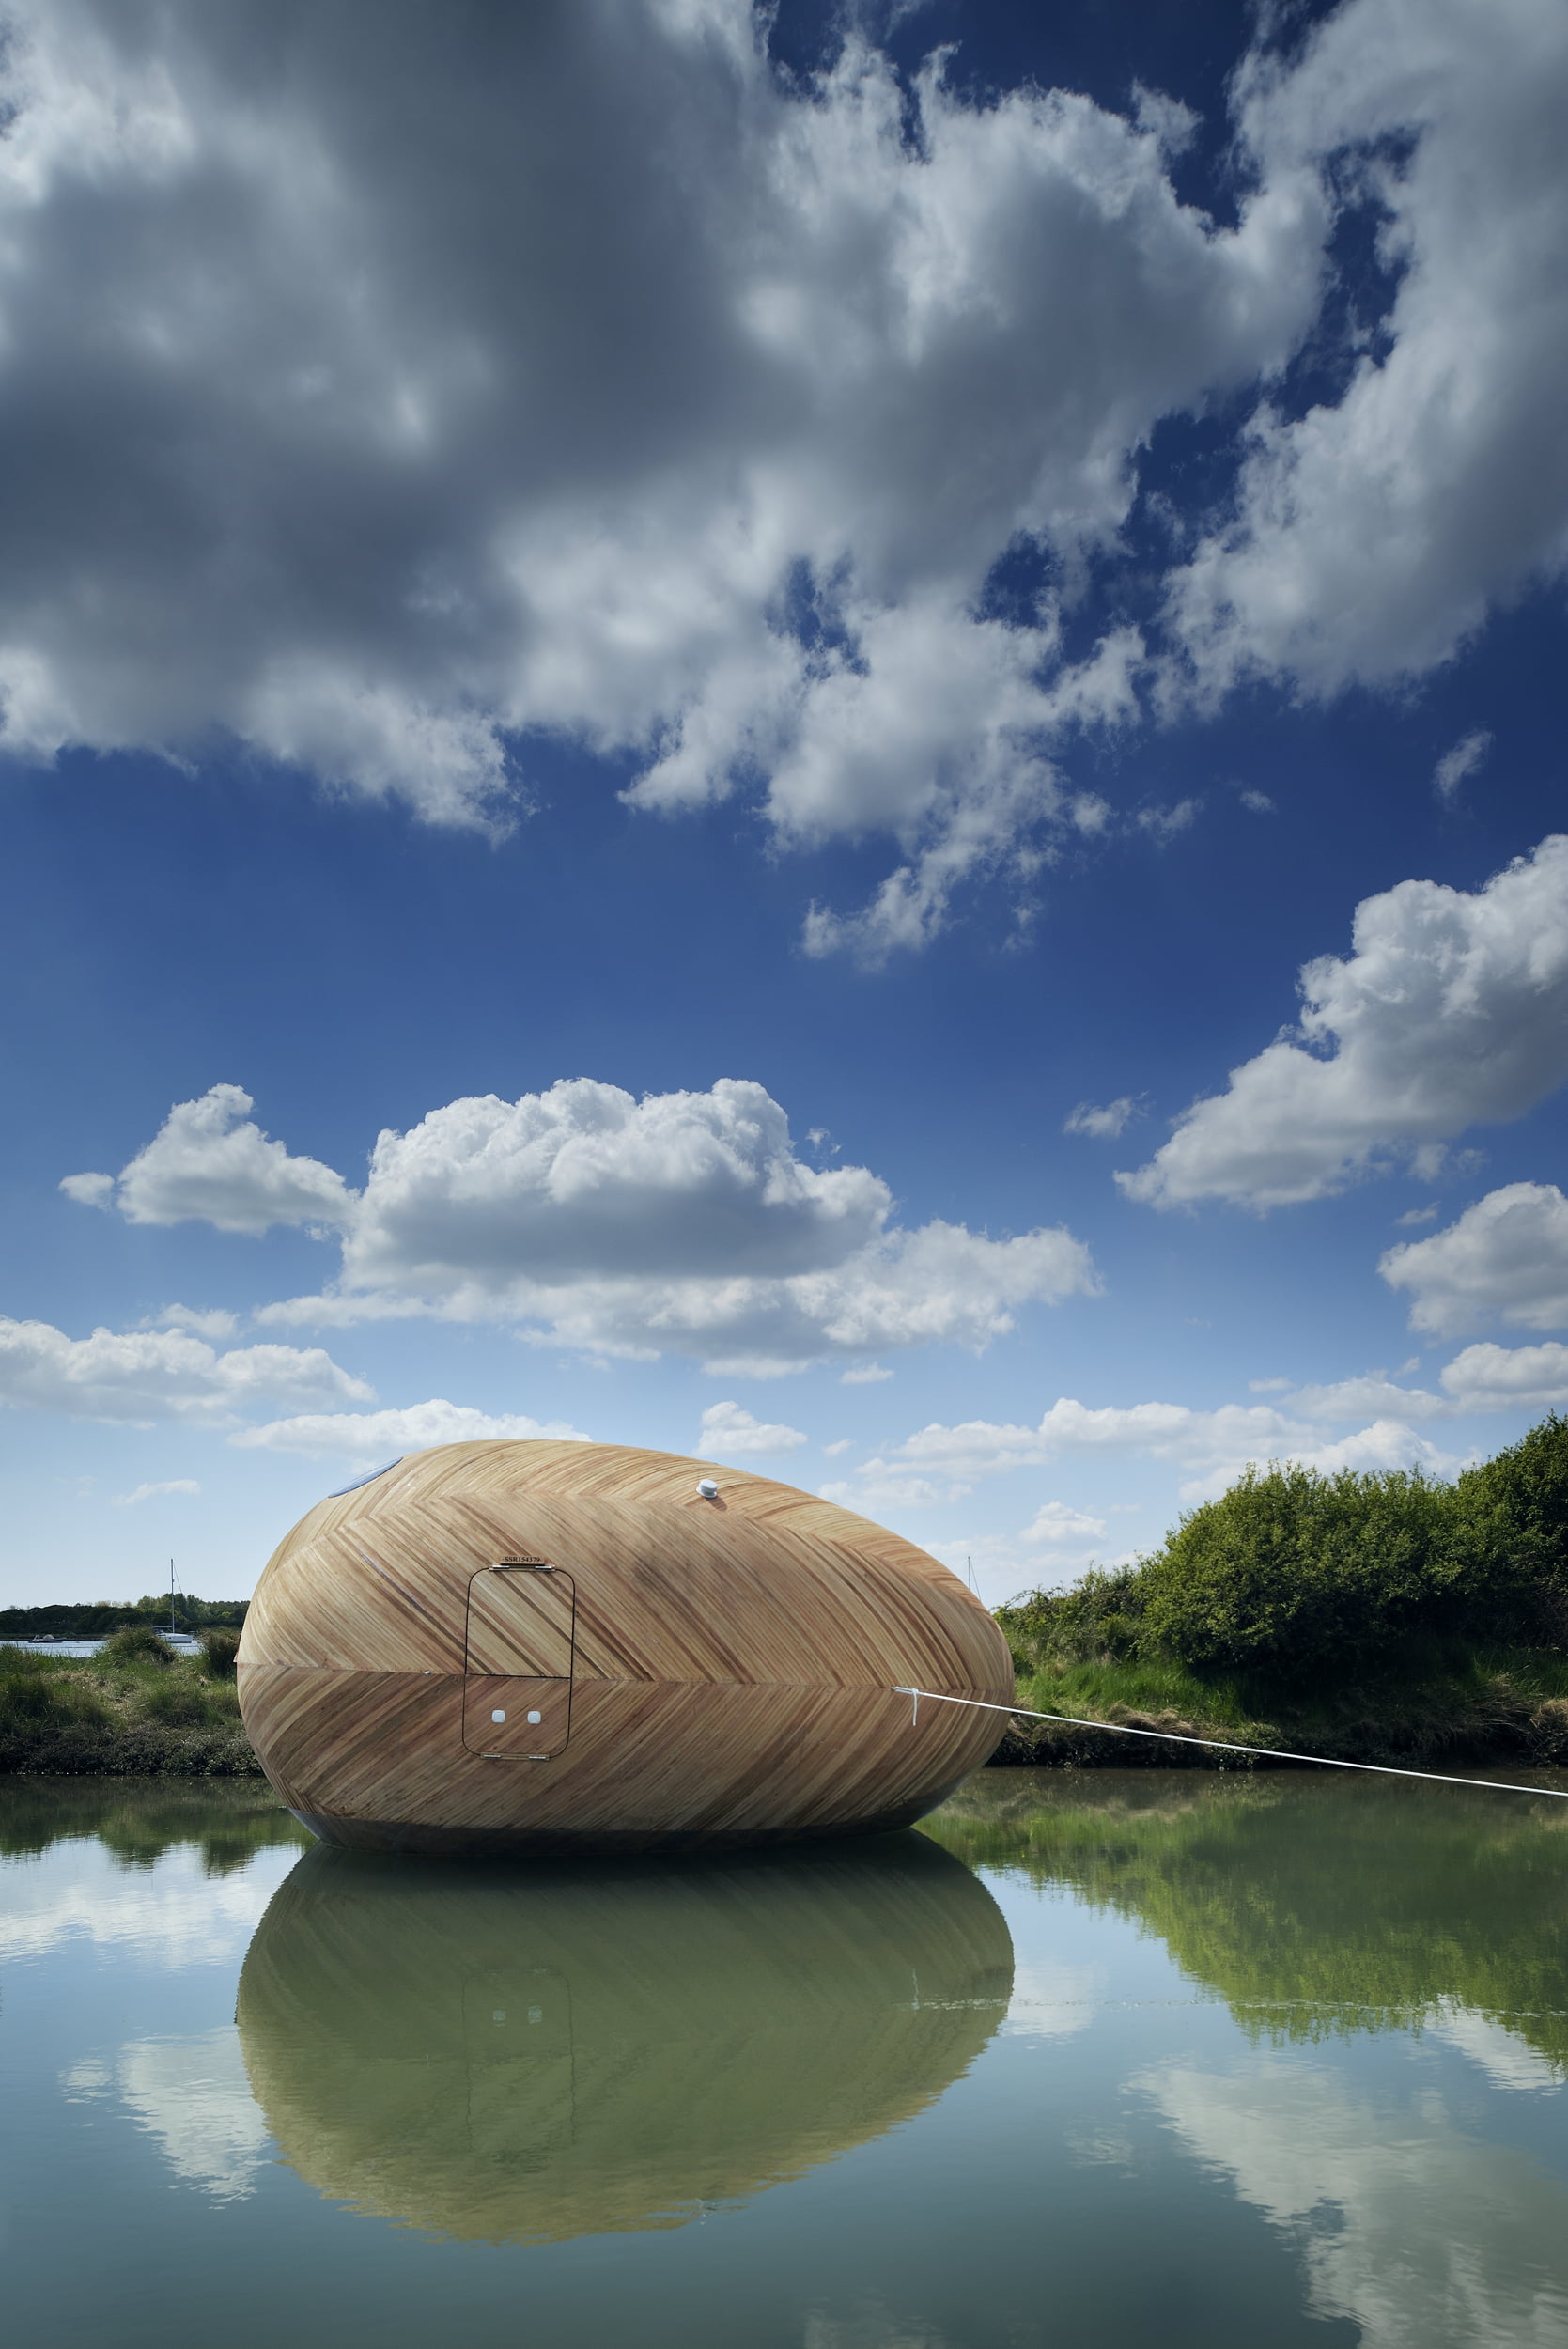 House Tour: A Giant Wooden Egg-Shaped Home in the UK